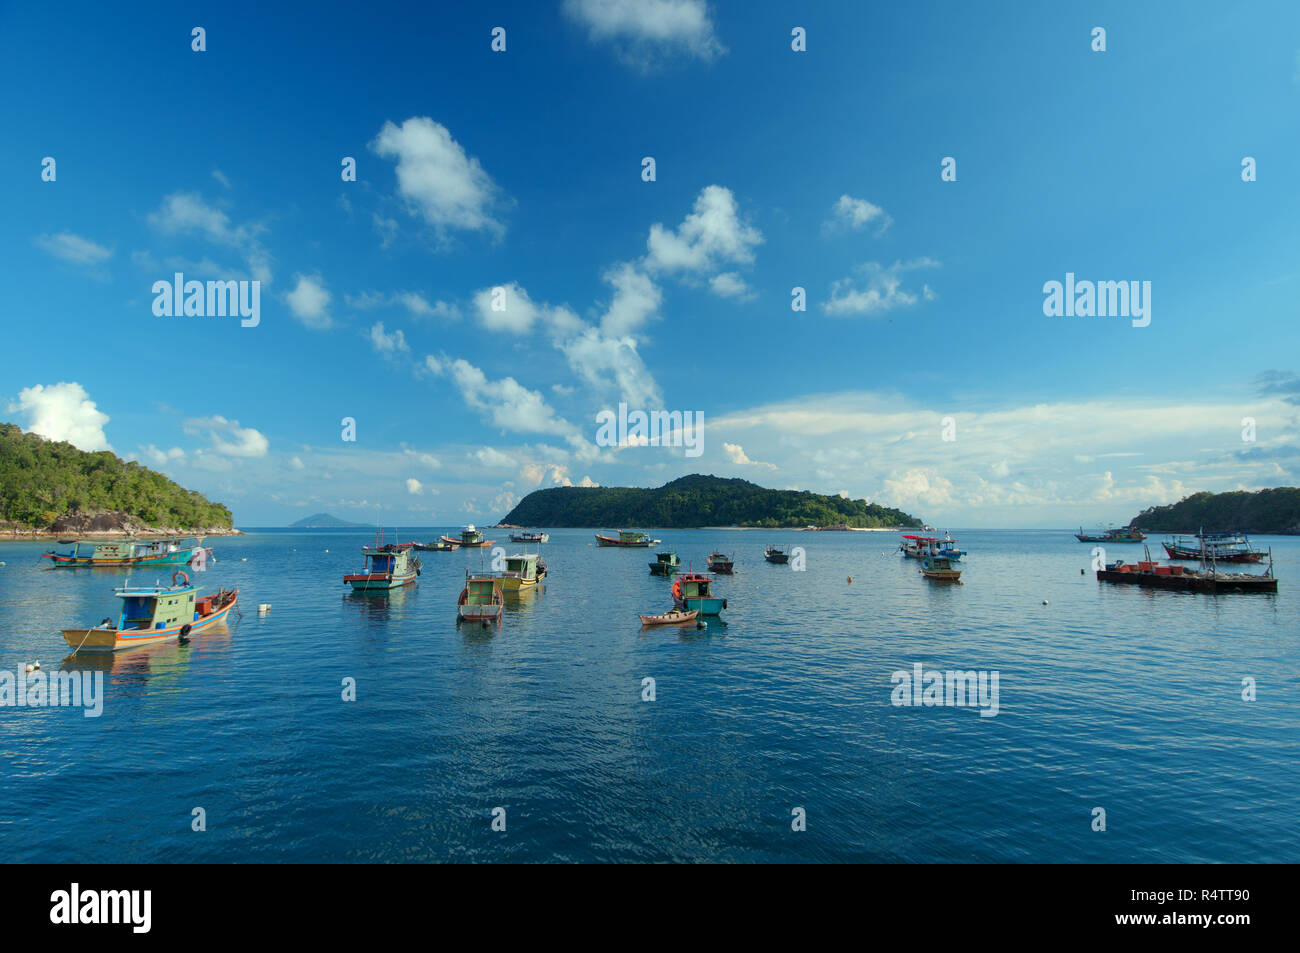 Colorful boats in the gulf, Redang Island, Malaysia Stock Photo